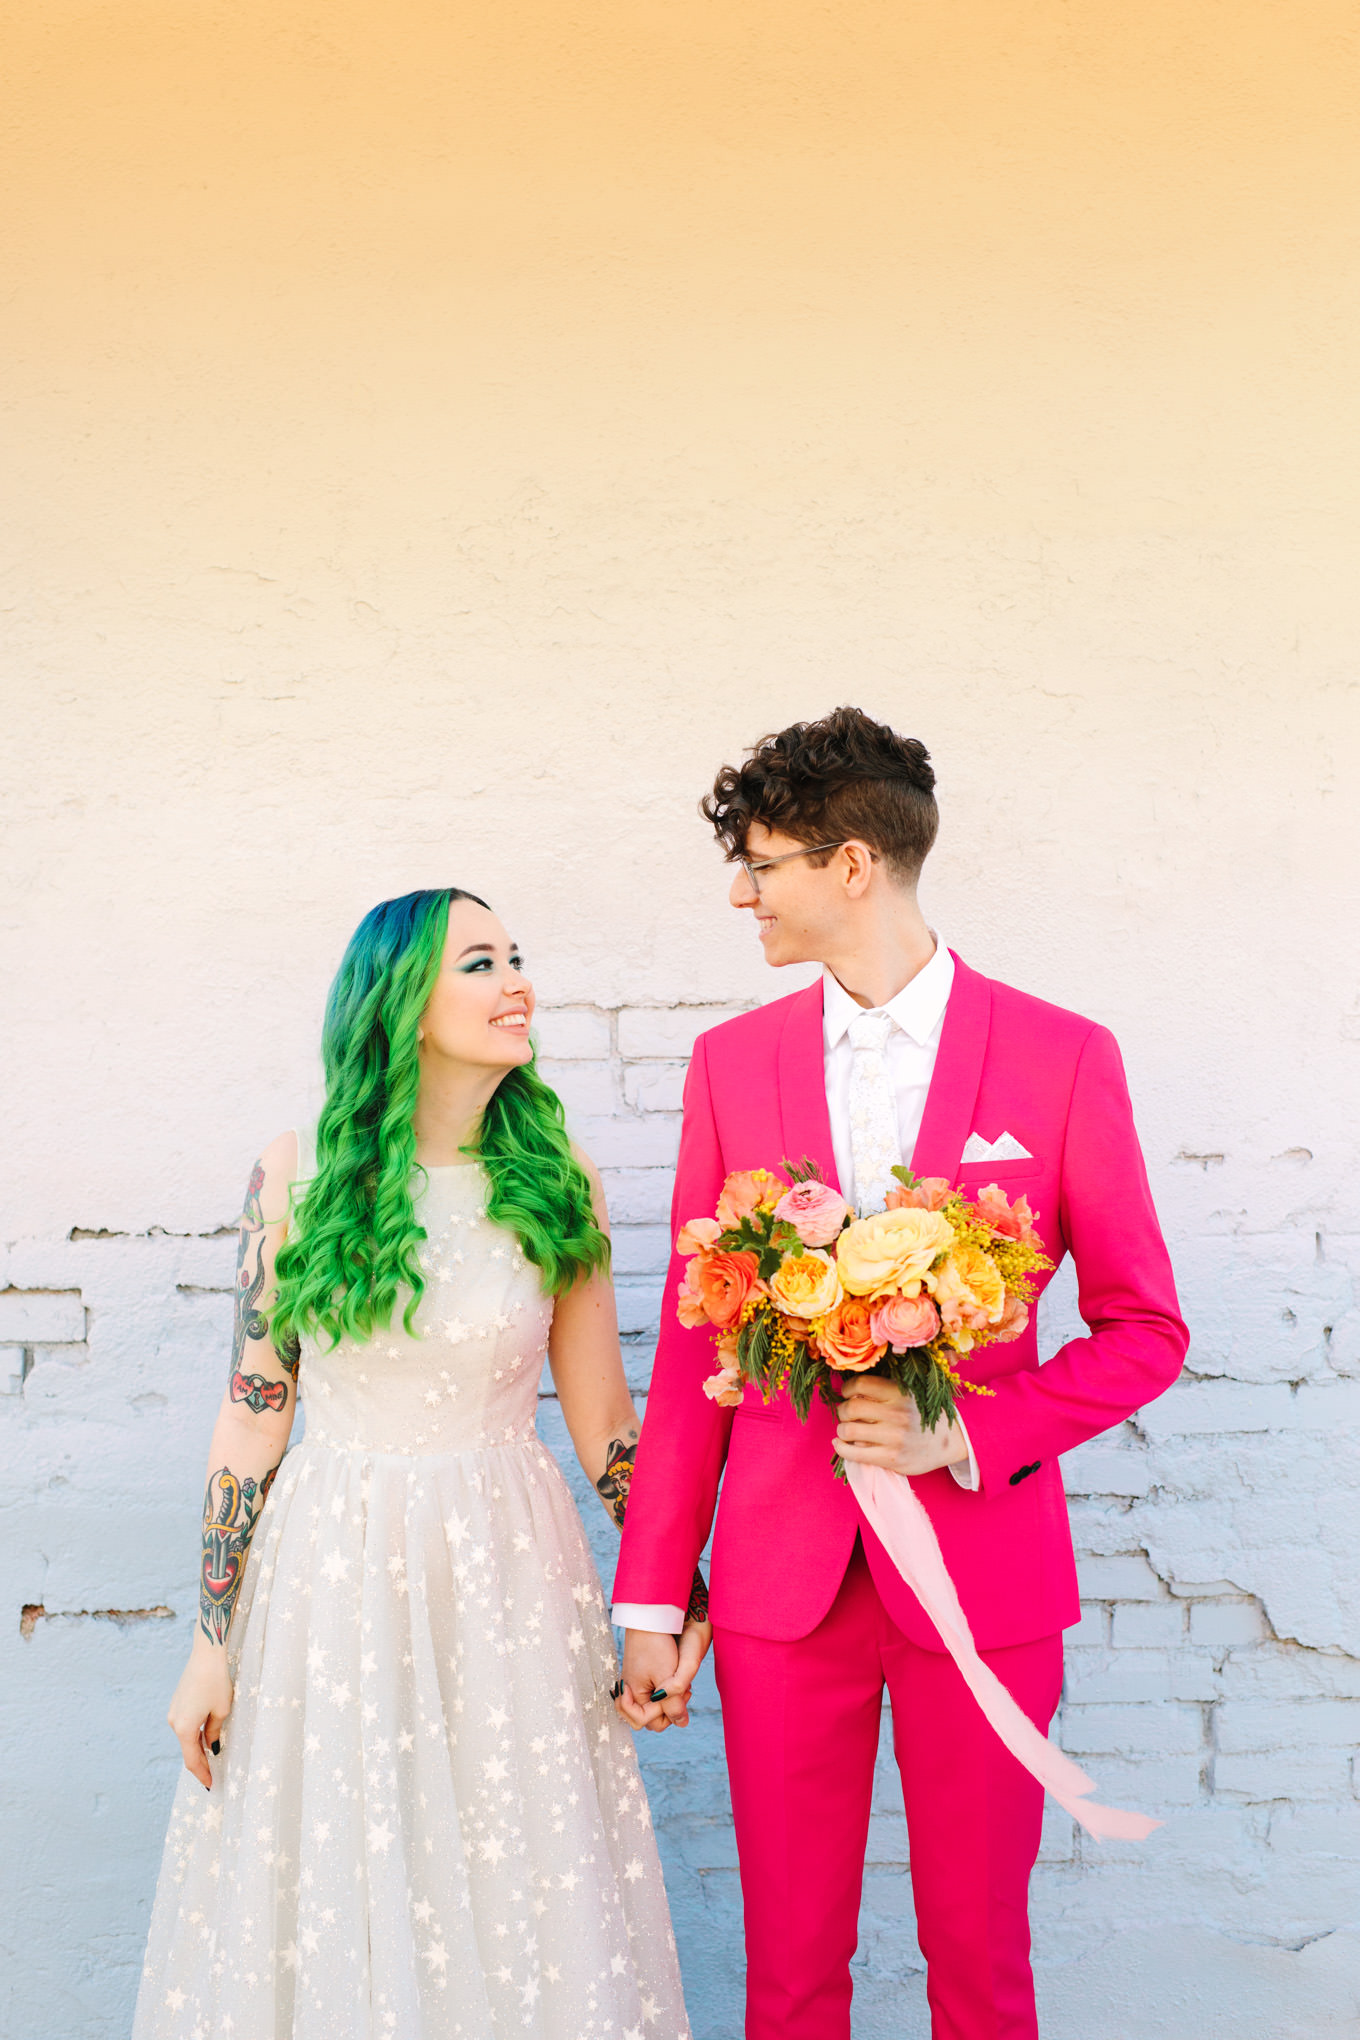 Bride with neon green hair and groom in hot pink suit | Colorful wedding at The Unique Space Los Angeles published in The Knot Magazine | Fresh and colorful photography for fun-loving couples in Southern California | #colorfulwedding #losangeleswedding #weddingphotography #uniquespace Source: Mary Costa Photography | Los Angeles